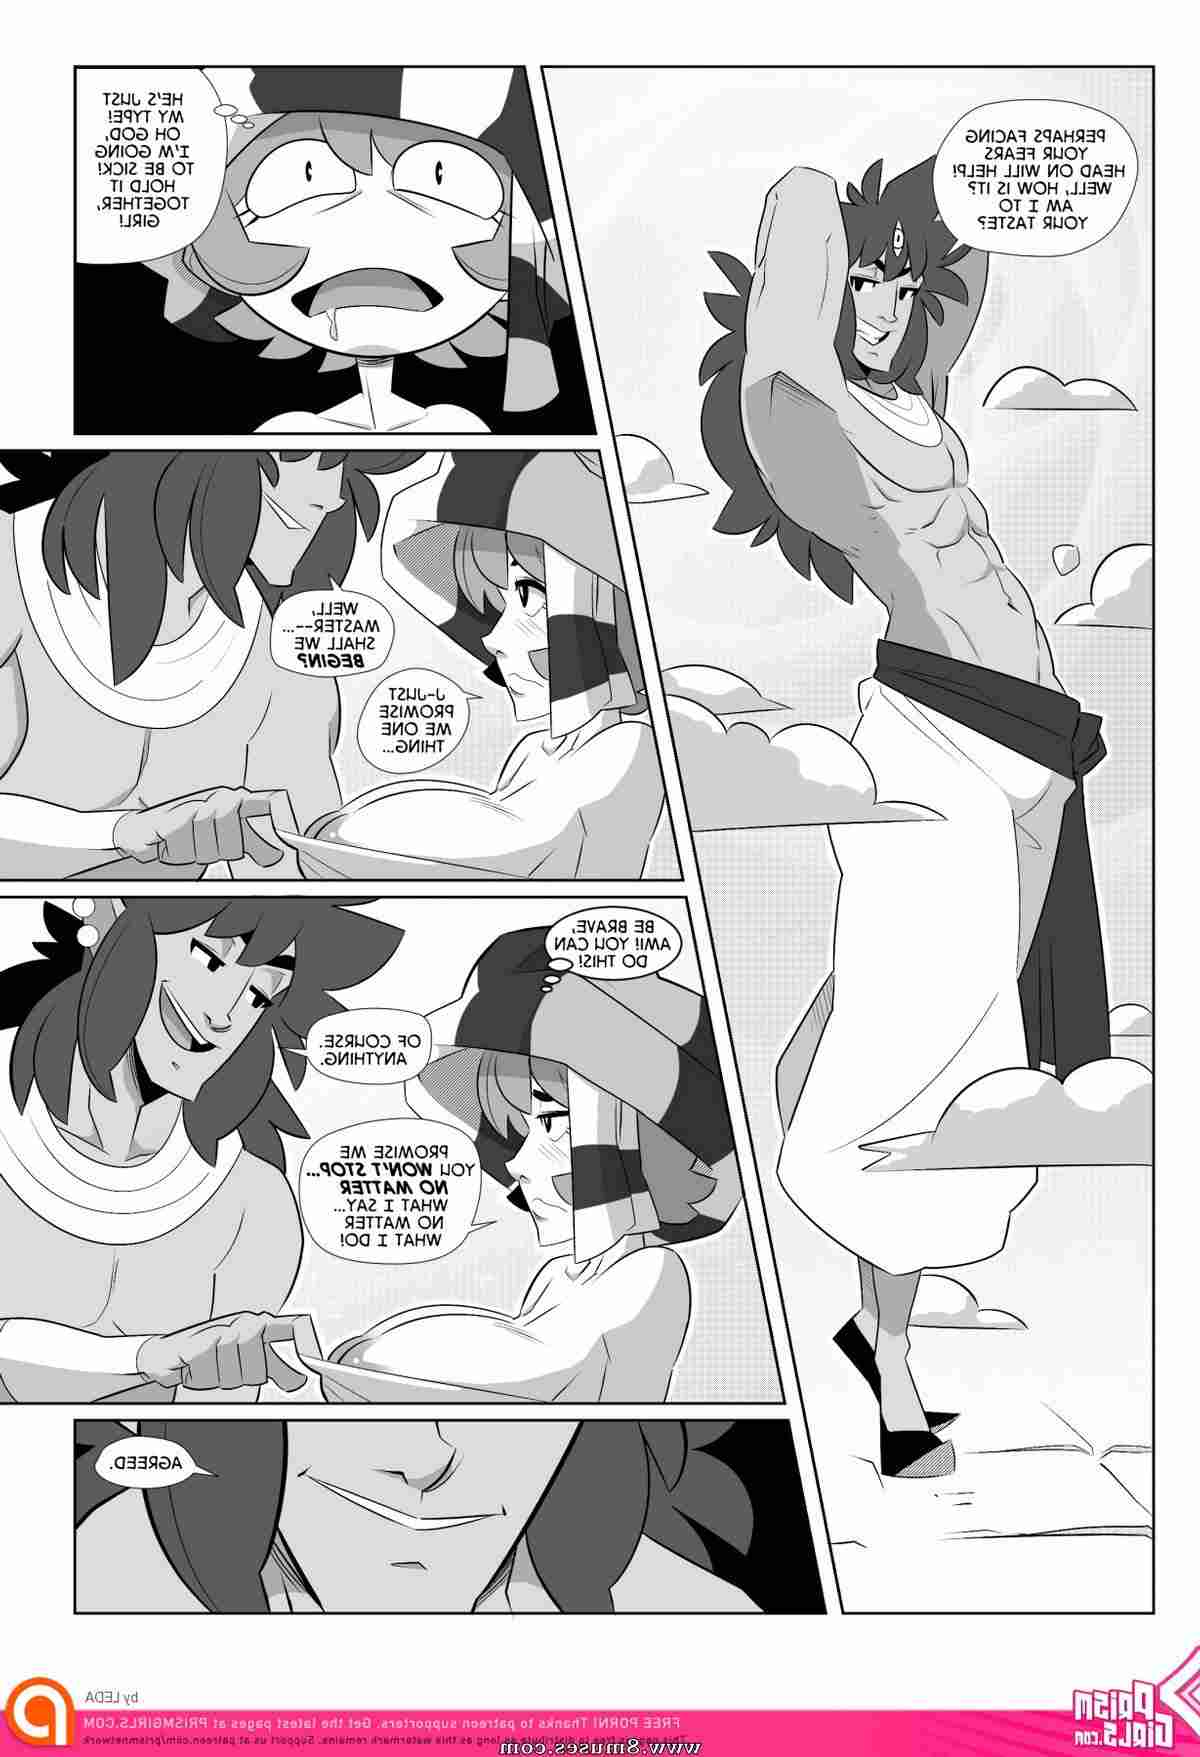 PrismGirls-Comics/One-Wish One_Wish__8muses_-_Sex_and_Porn_Comics_4.jpg